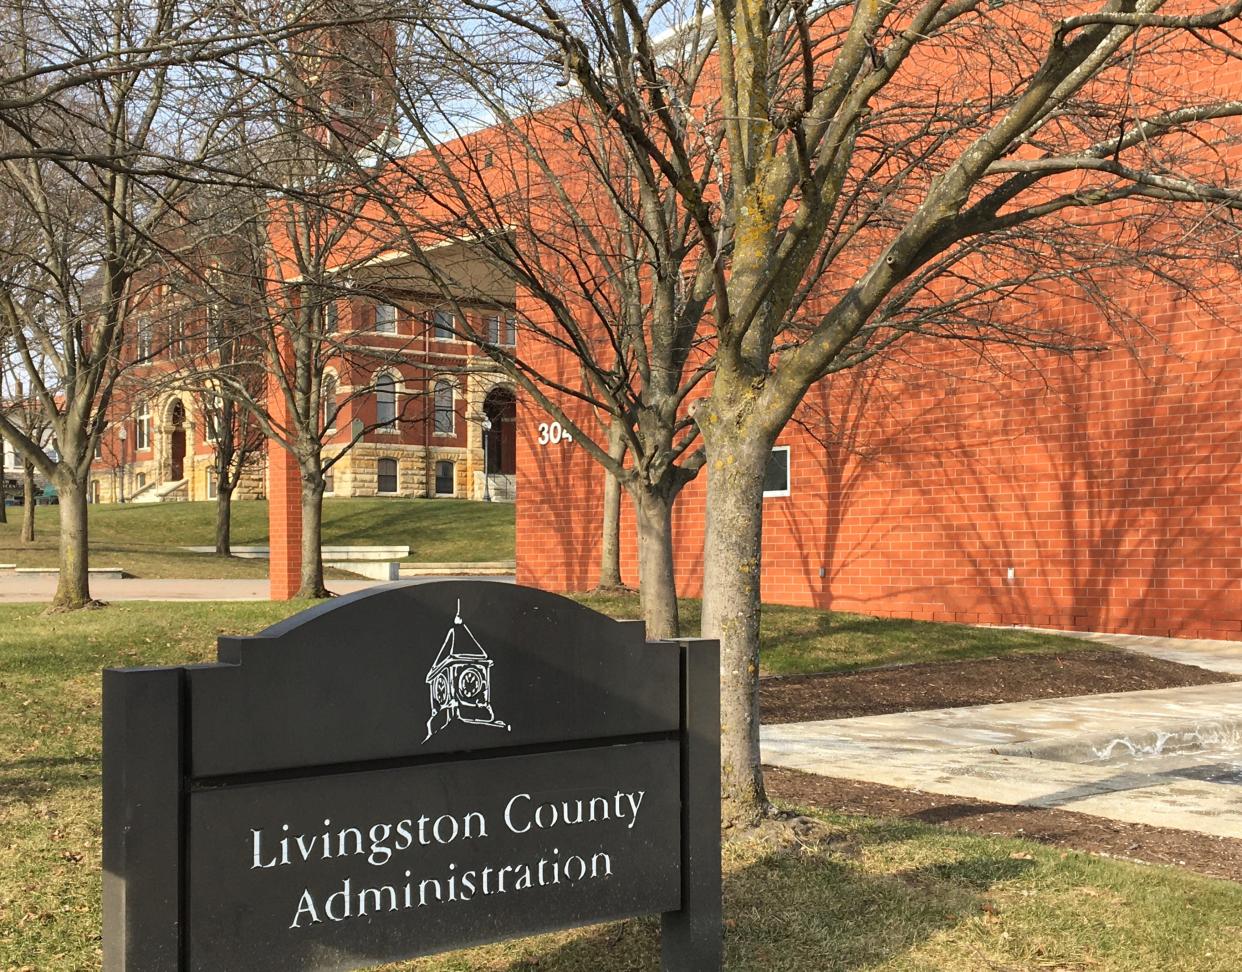 The Livingston County Board of Commissioners voted, 7-2, to change their moment of silent reflection to a moment of silent prayer during their Jan. 17, 2023 meeting.